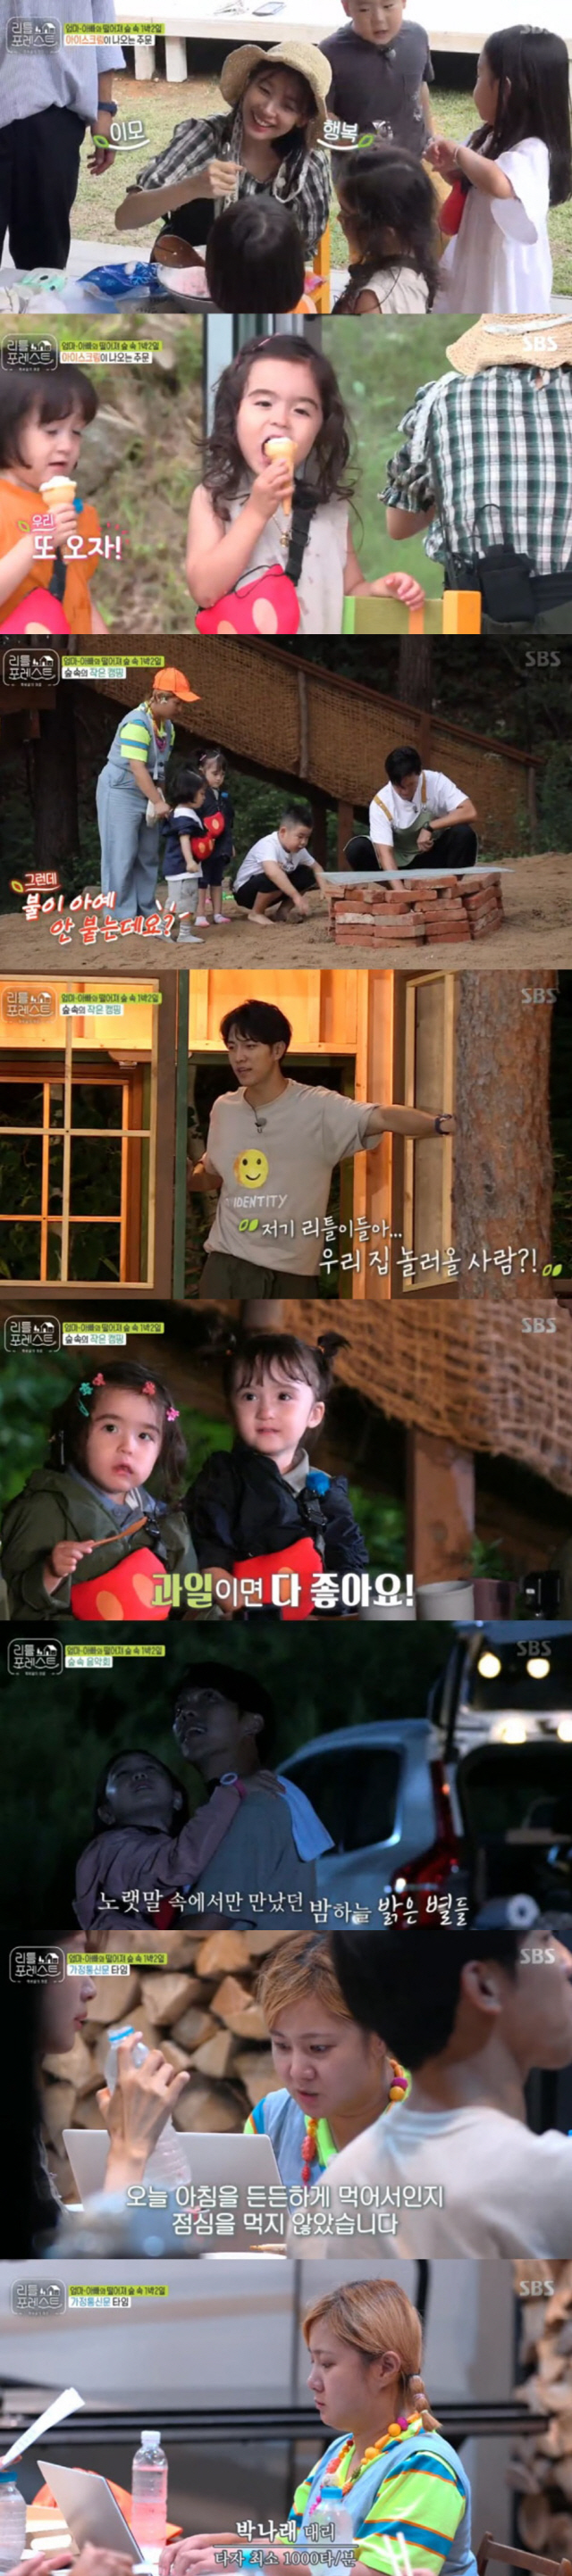 SBS Wall Street entertainment Little Forest soared to 5.7% of the highest TV viewer ratings per minute.The Indian Tent, the highlight of Camping, was installed under the leadership of Lee Seung-gi-gi-gi-gi Gi and Park Na Rae. Little boys fell in love with monster play in the Tent, and Eugene naturally stepped on the soil.In the meantime, the members laughed at the appearance of Eugene, who had difficulty in stepping on the soil through soil play.In addition, Lee Seung-gi-gi-gi-gi-gi showed off his universal uncle aspect by baking meat after the Tent.However, Lee Han-yi, who saw this, said, If you put meat together, it will not cook well.The members shared their roles and gave children a happy evening in nature.Especially, at the end of Camping, Lee Seung-gi-gi-gi-gi Gis proposal made the members and Little feel the night and the sky of nature.The members sent a home correspondence to their childrens parents at the last time of the day.All the members sat around and carefully conveyed the childrens story of the day with the photos, and communicated with their parents in real time and talked.The scene rose to 5.7% of the highest TV viewer ratings per minute, accounting for the best one minute.Meanwhile, Little Forest, which was scheduled to air today (10th), will be released due to the Korea: Turkmenistan relay broadcast of the 2022 FIFA Qatar World Cup Second Qualifier Korea and will be broadcast at 10 p.m. on the 16th (Mon).